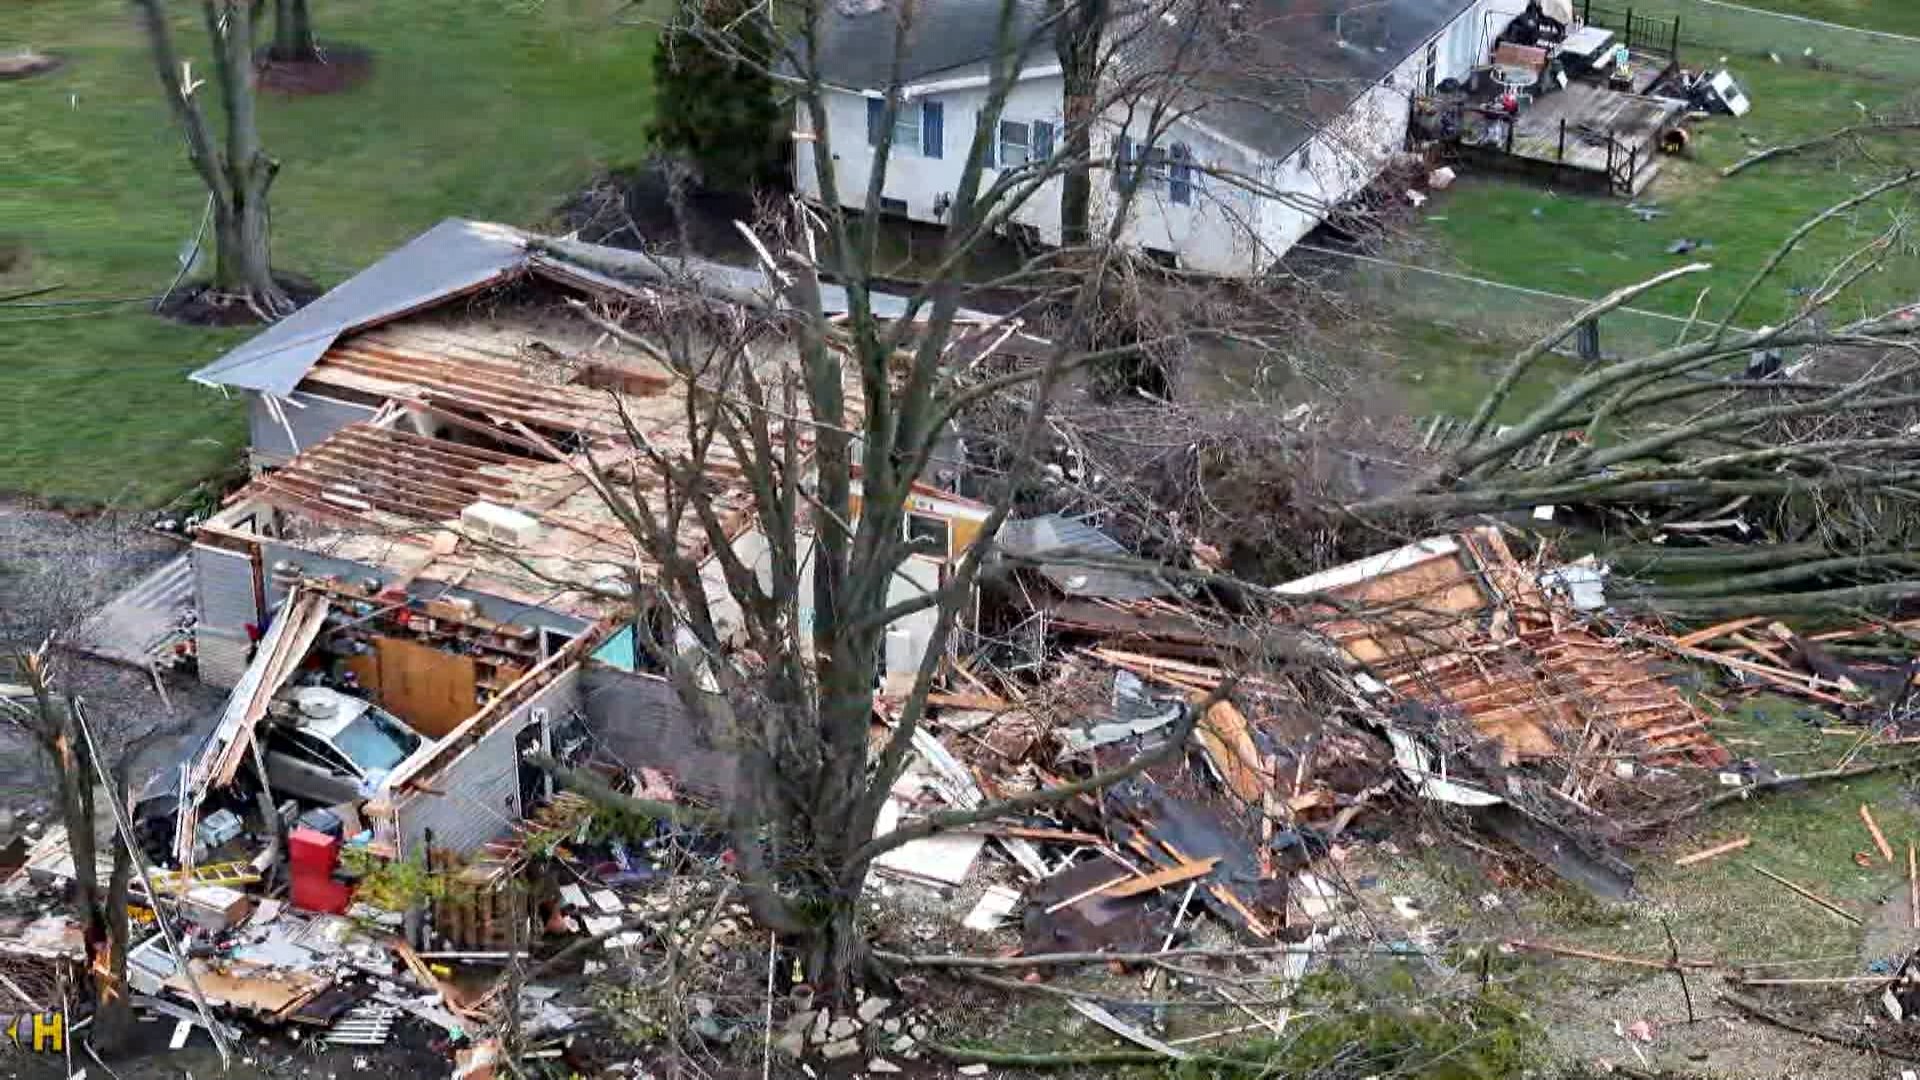 This is a bird's-eye view of the damage a house in Hilliard sustained from the overnight storms.